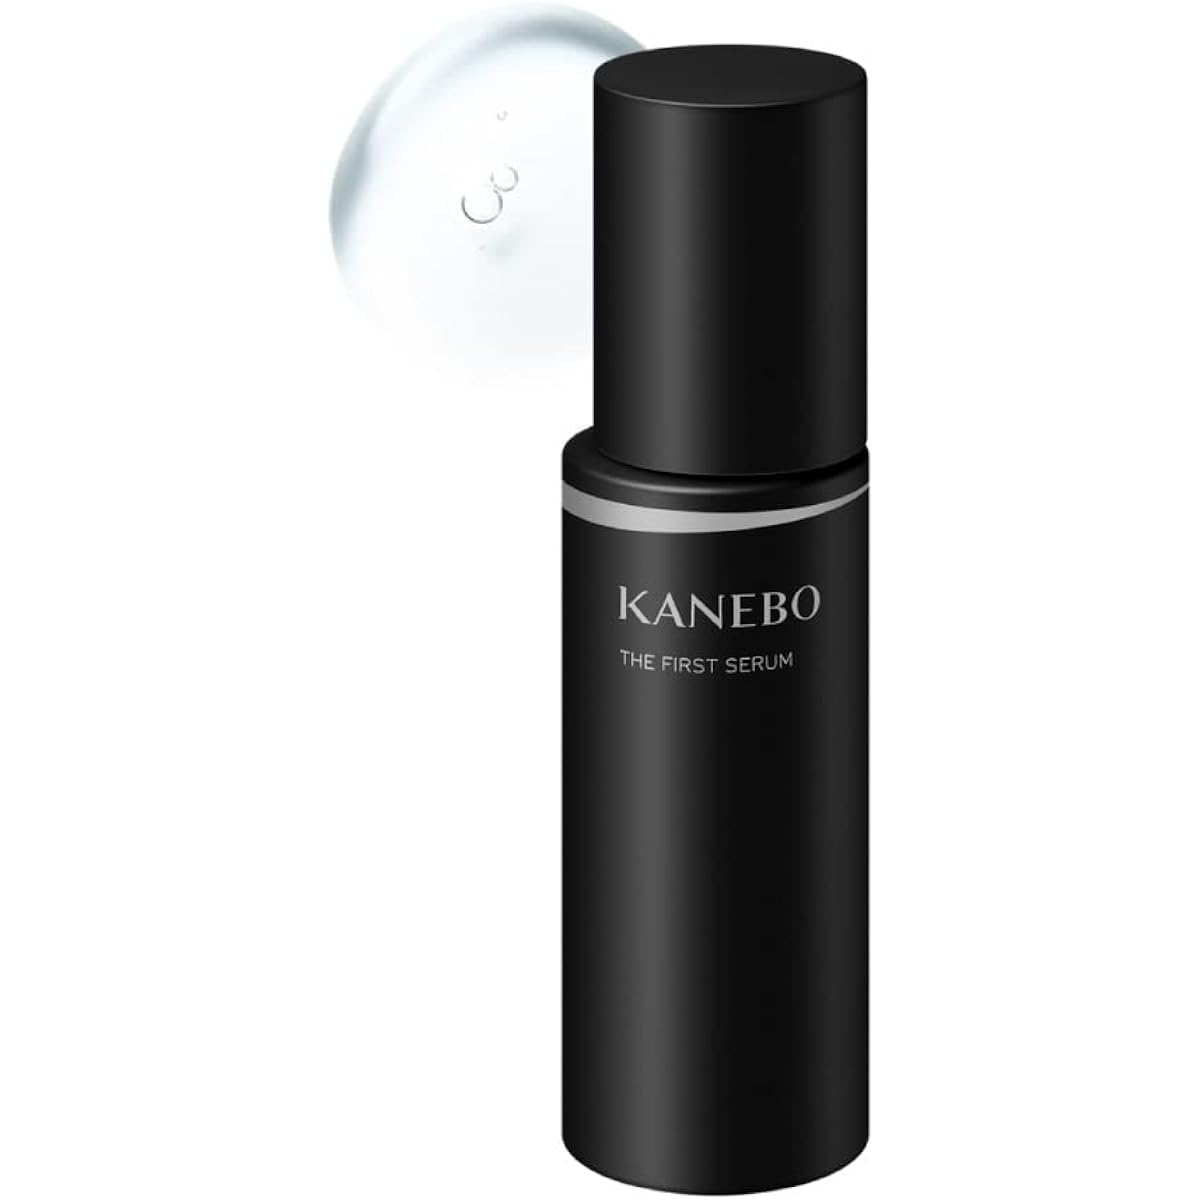 KANEBO The First Serum a